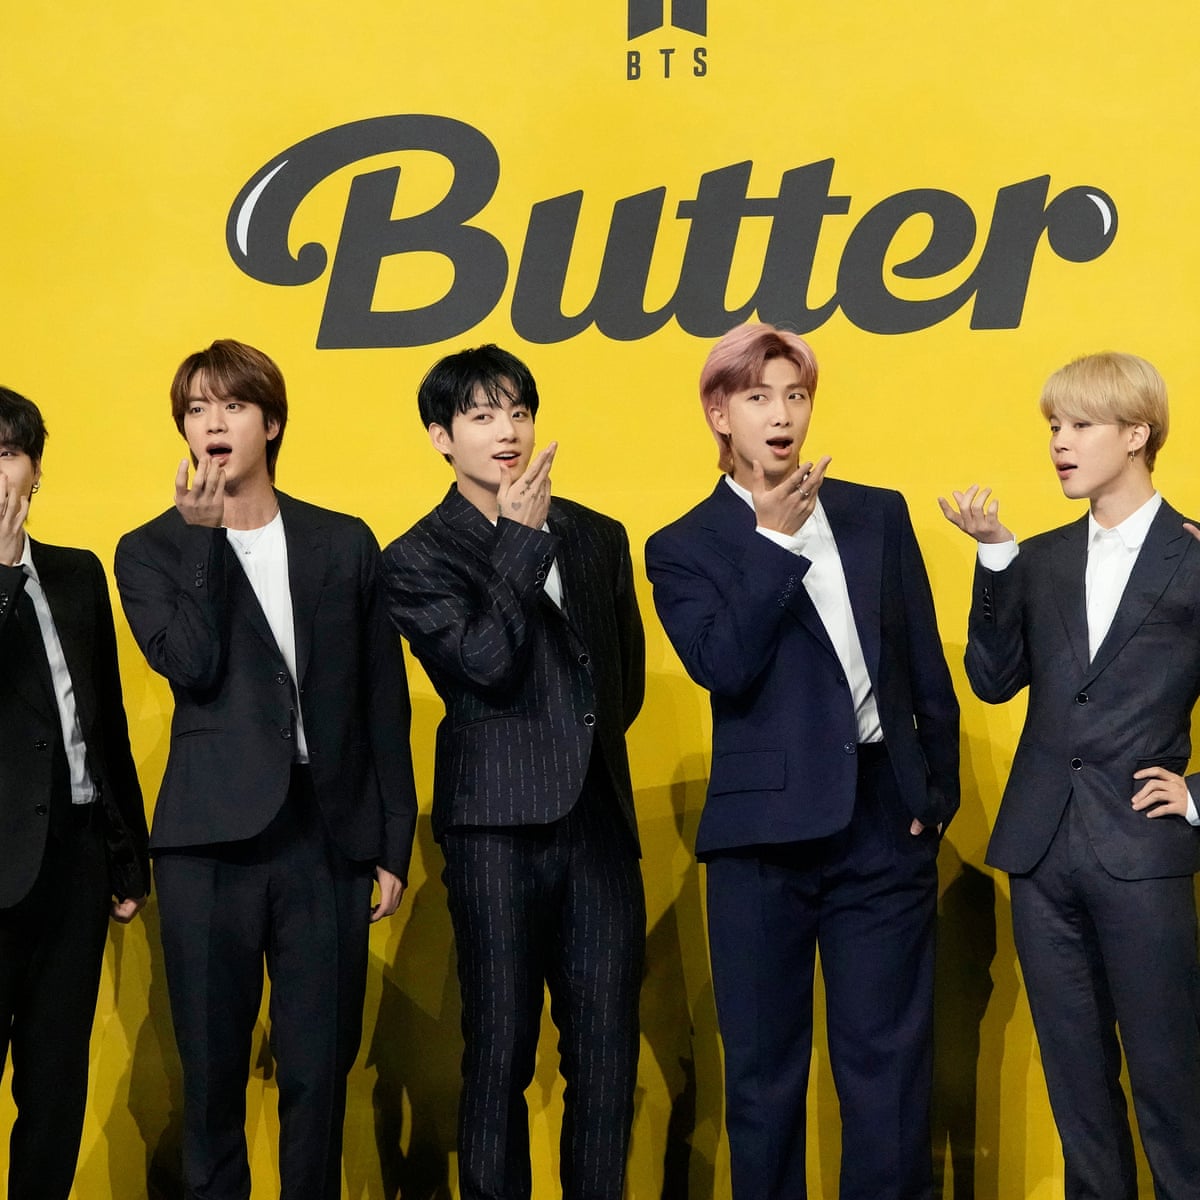 Sorry, Swifties: BTS revealed as authors of mystery book that ...